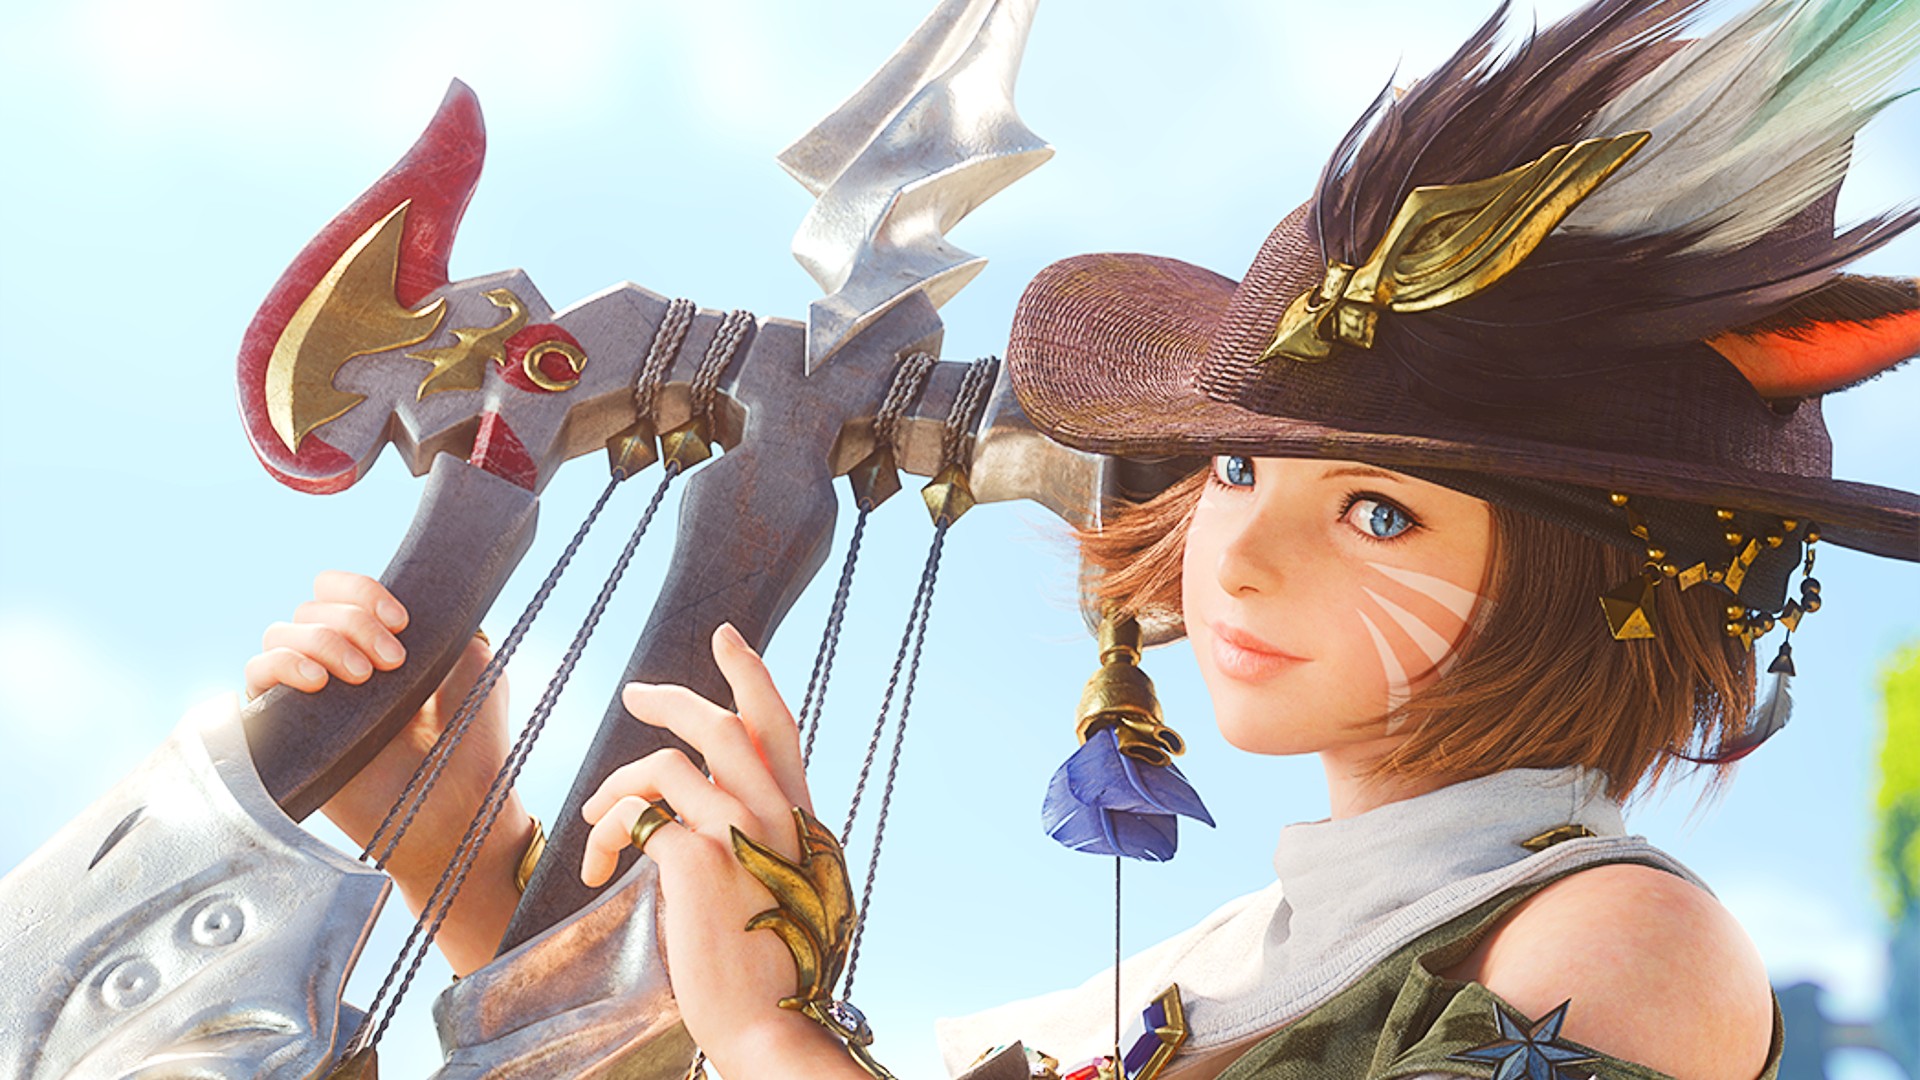 FFXIV modder plays Archer with a Nerf bow controller